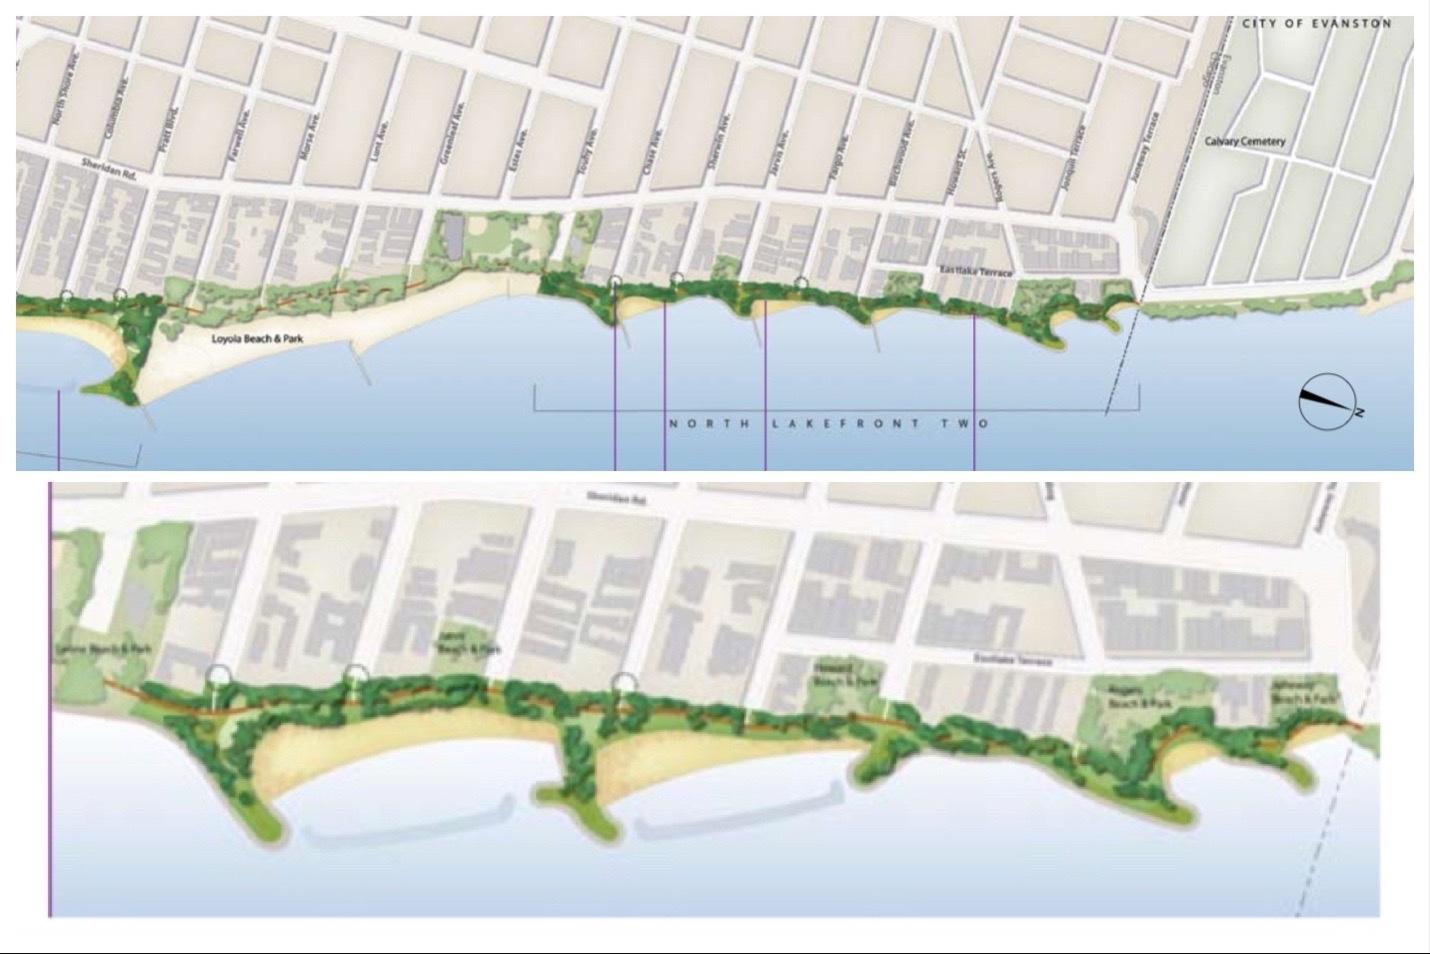 Proposals to create new, connected parks on Chicago's north lakefront in the Rogers Park neighborhood. (The Last Four Miles report / Friends of the Parks) 